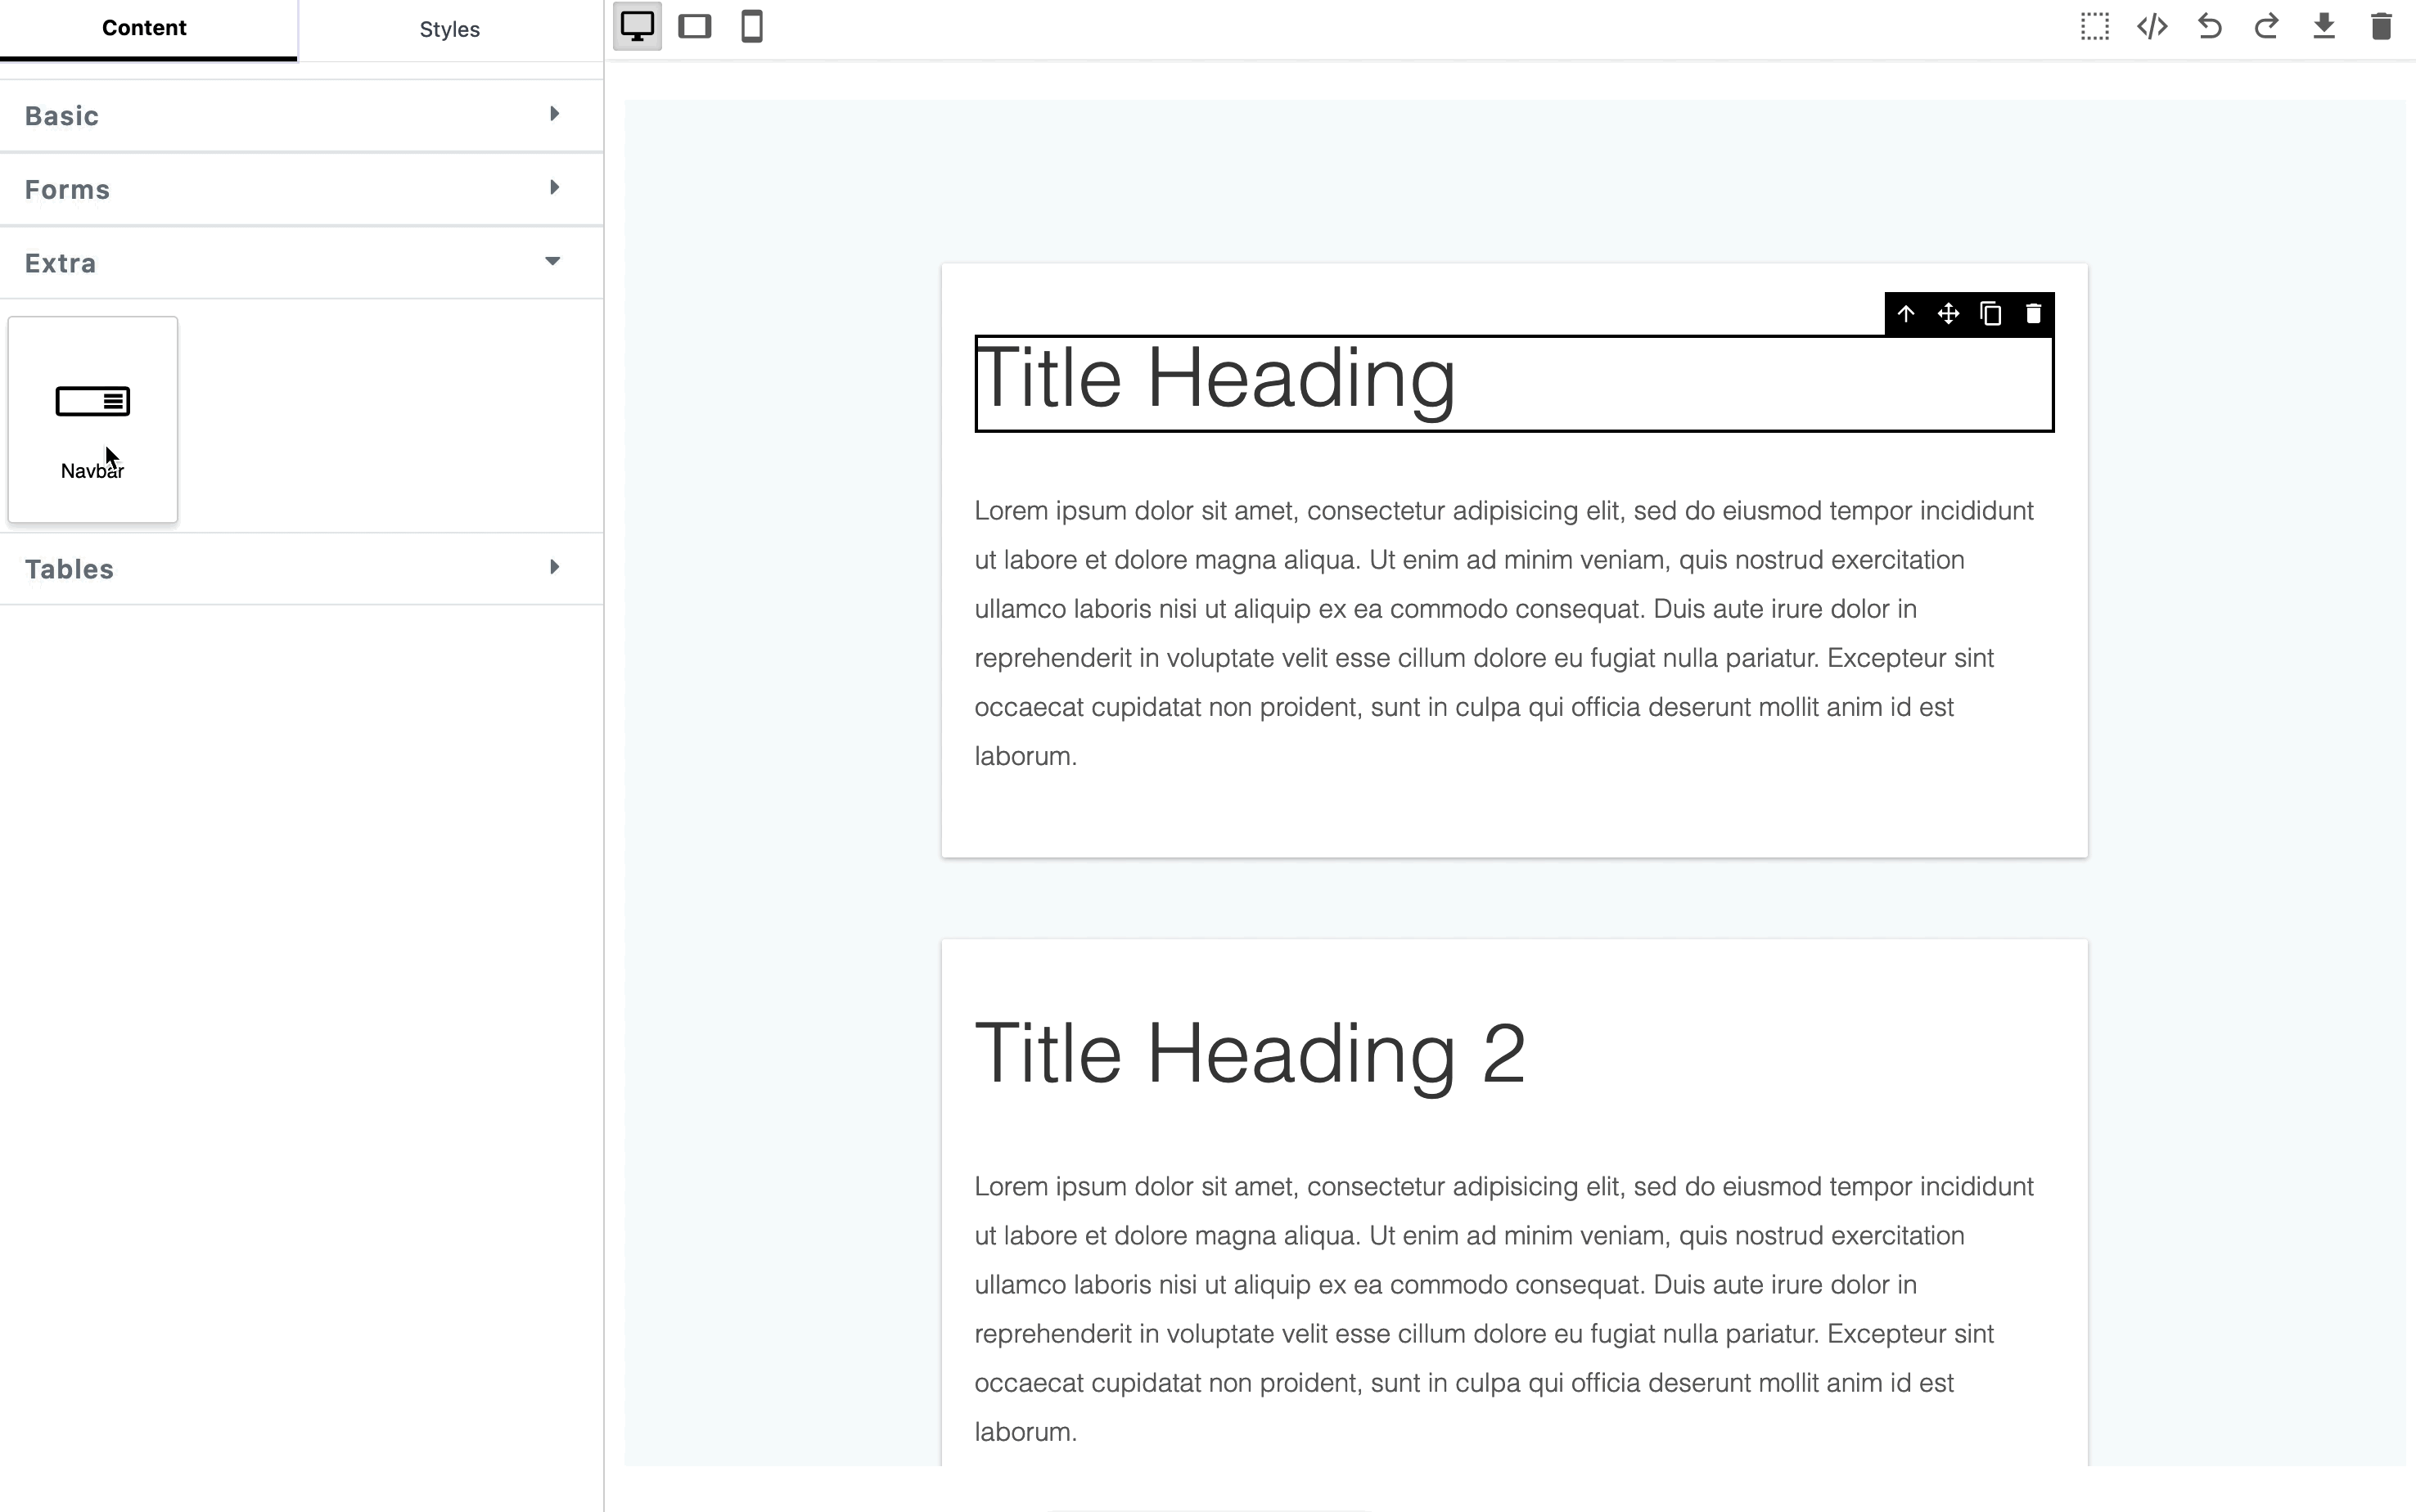 Placeholder 2.0 - New dragging effect for components